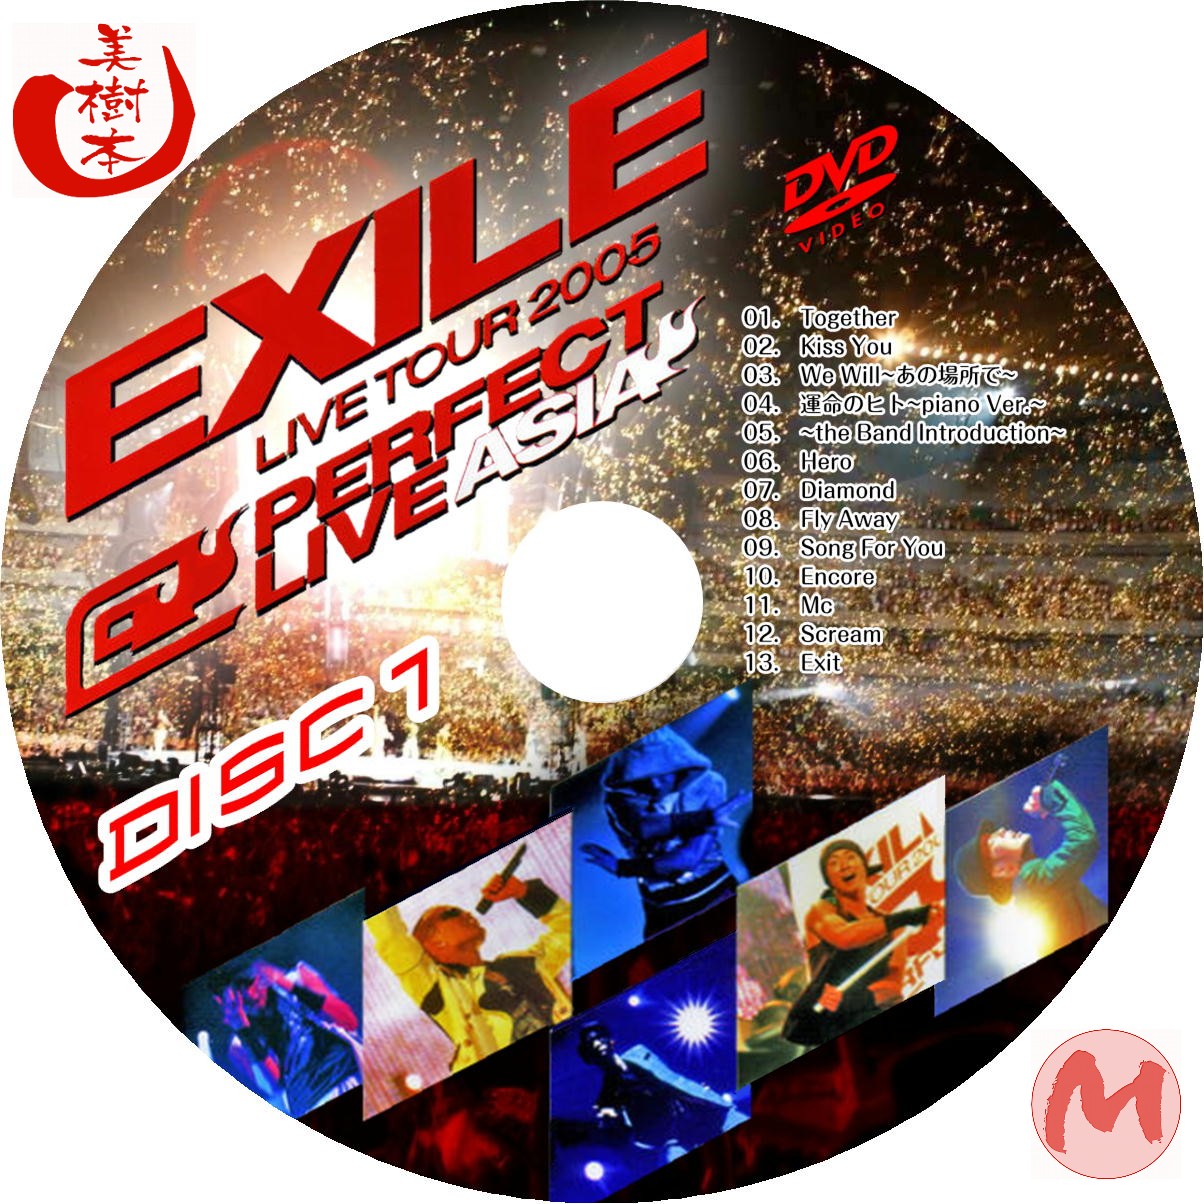 exile live tour 2005 perfect live asia dvd